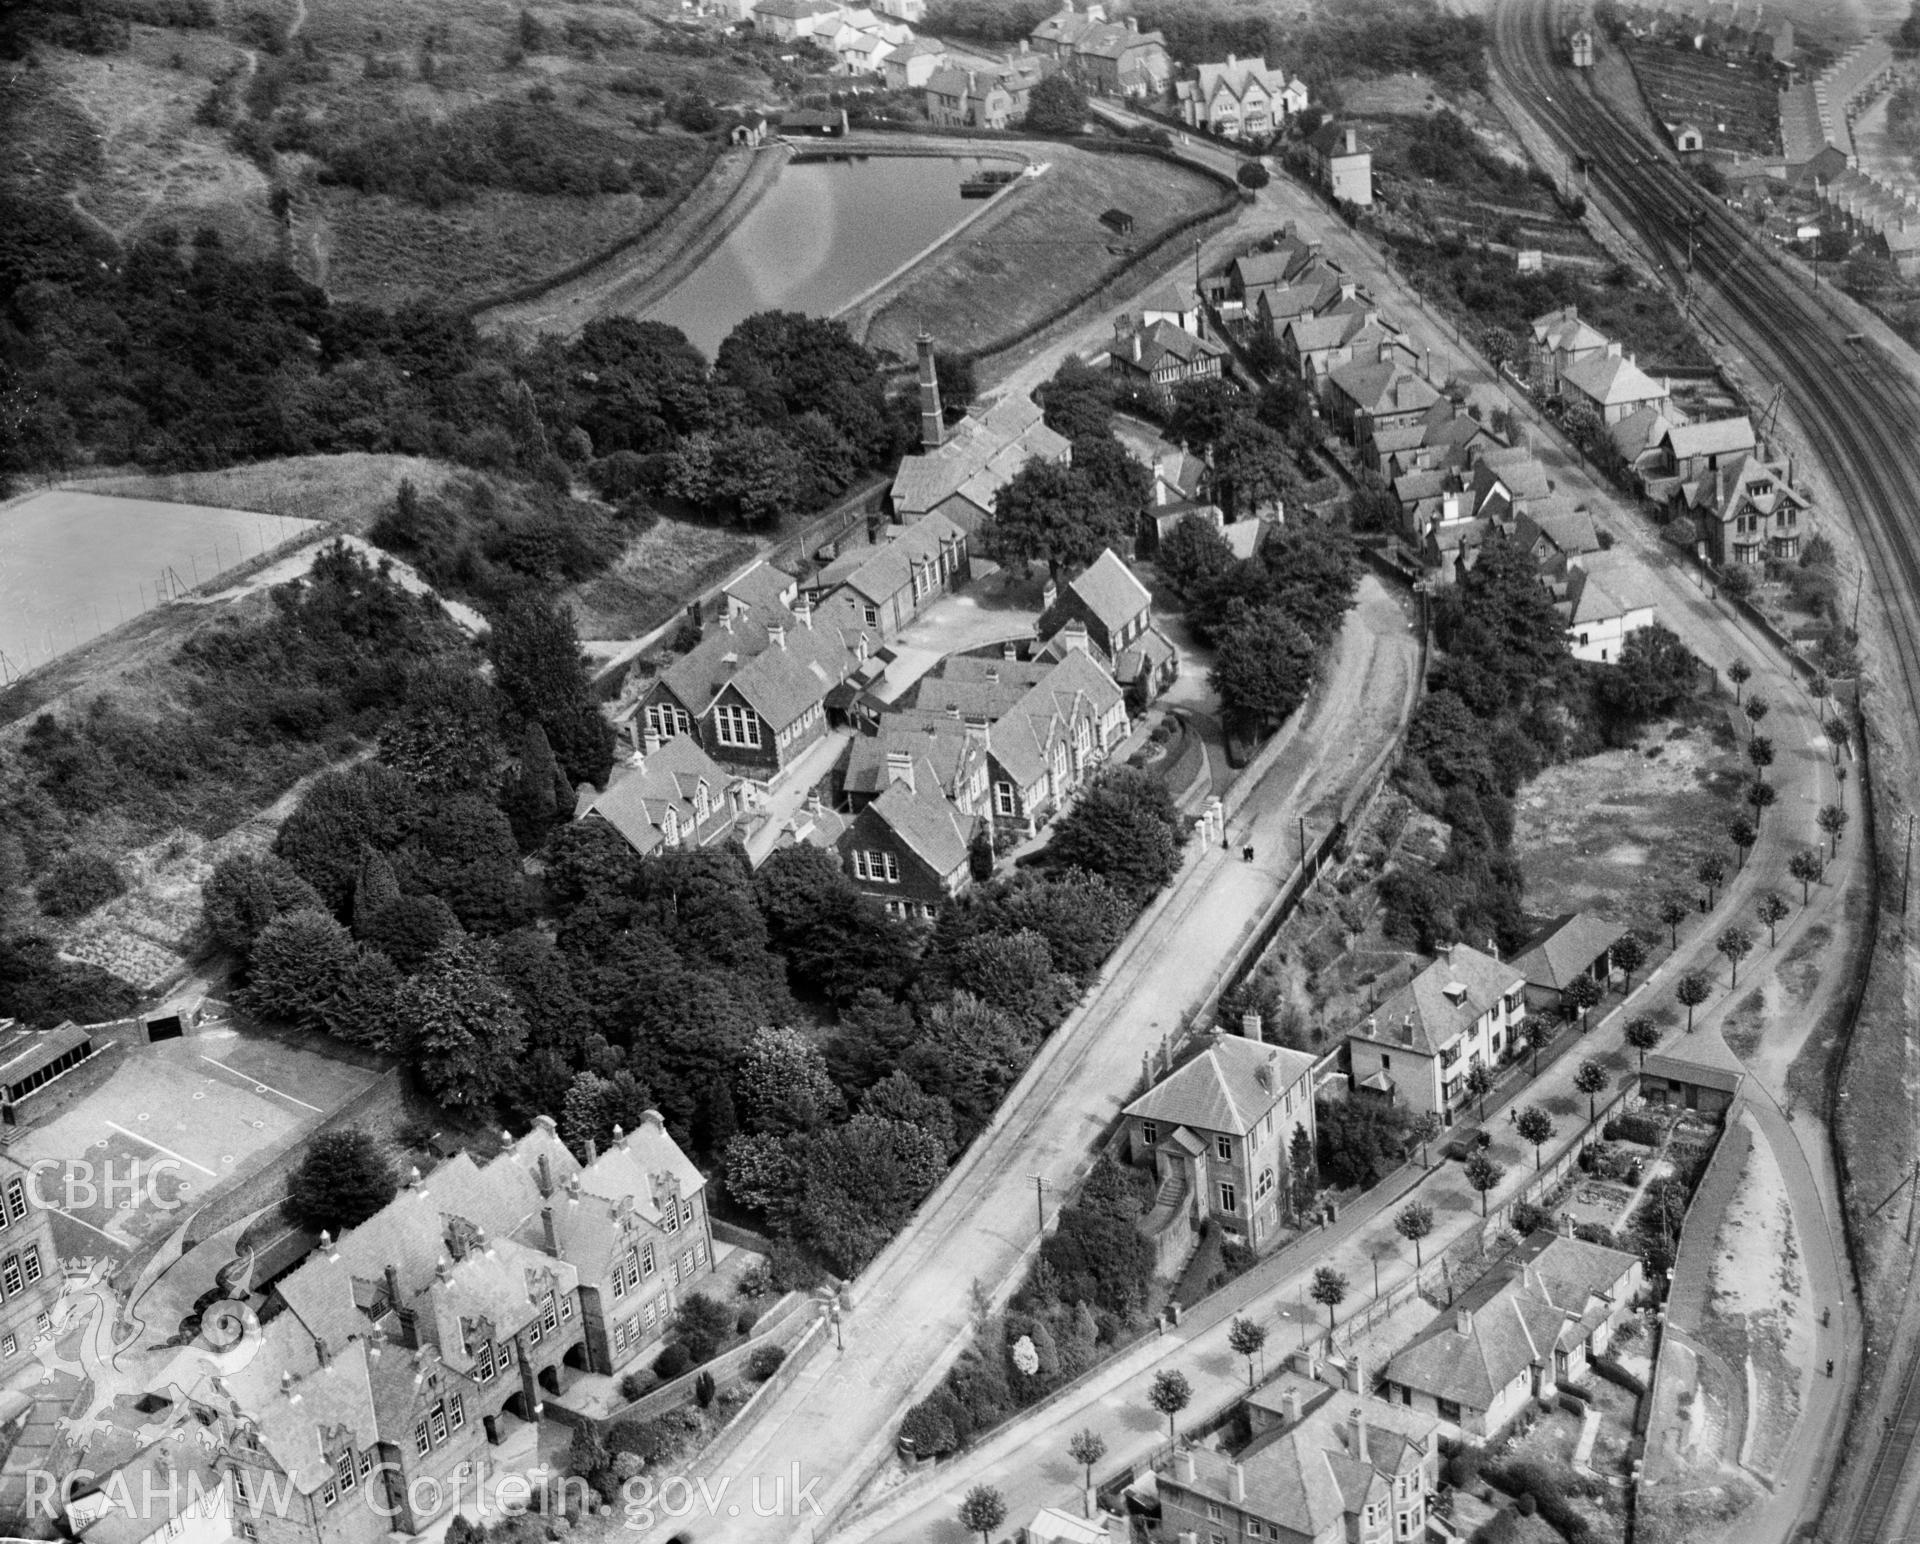 View of Pontypridd showing Grammar school, tennis courts and Lan Wood reservoir, oblique aerial view. 5?x4? black and white glass plate negative.